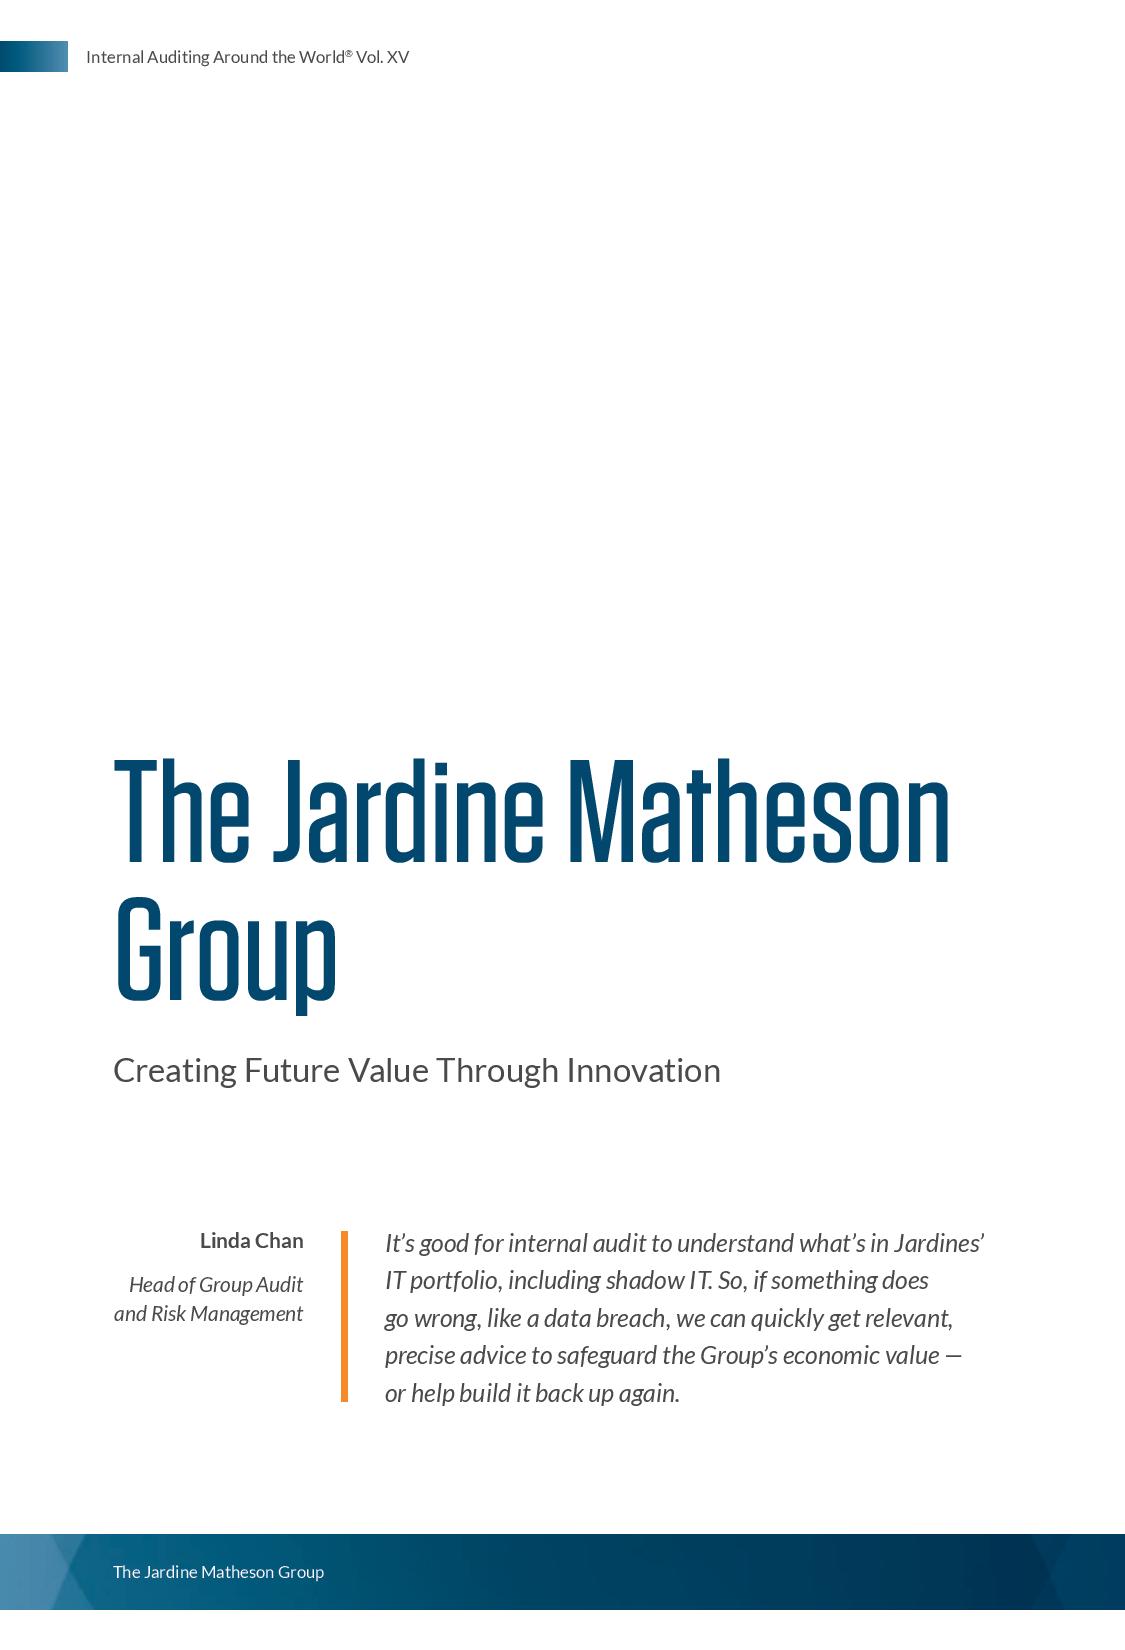 Screenshot of the first page of The Jardine Matheson Group Creating Future Value Through Innovation